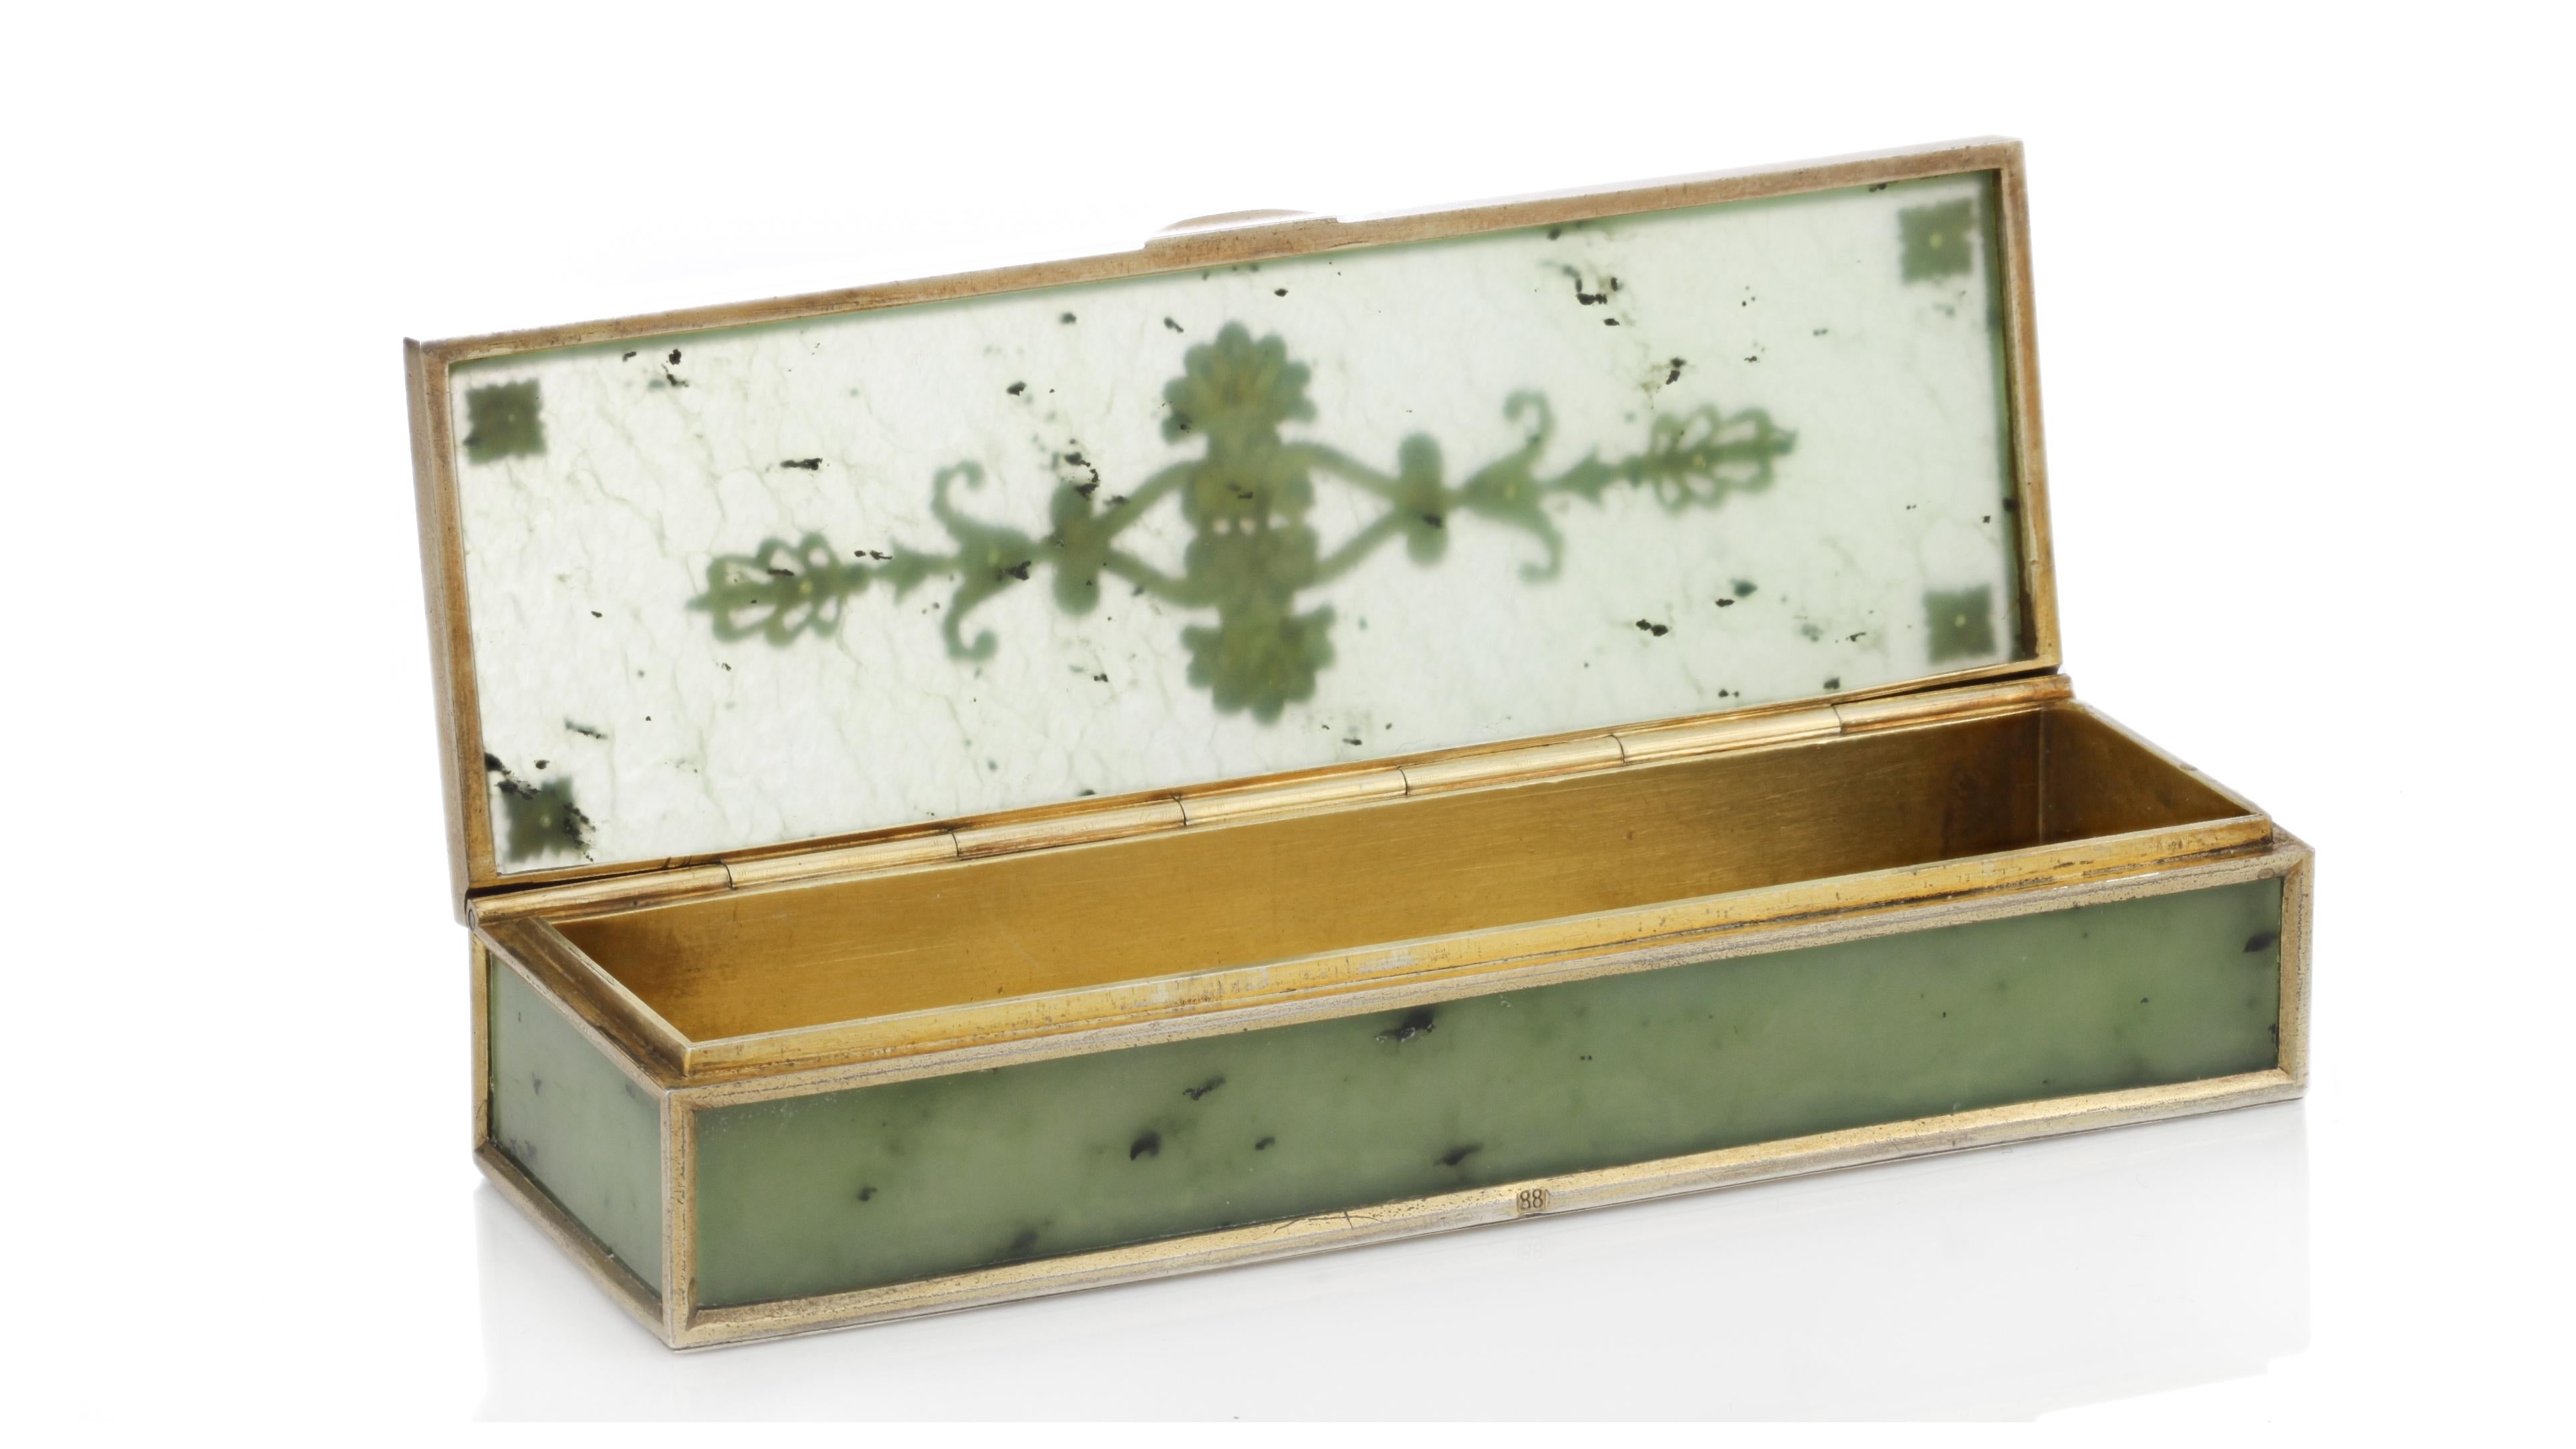 Late 19th Century Antique Early 20th Century Russian Faberge Solid Silver-Gilt & Nephrite Box 1899